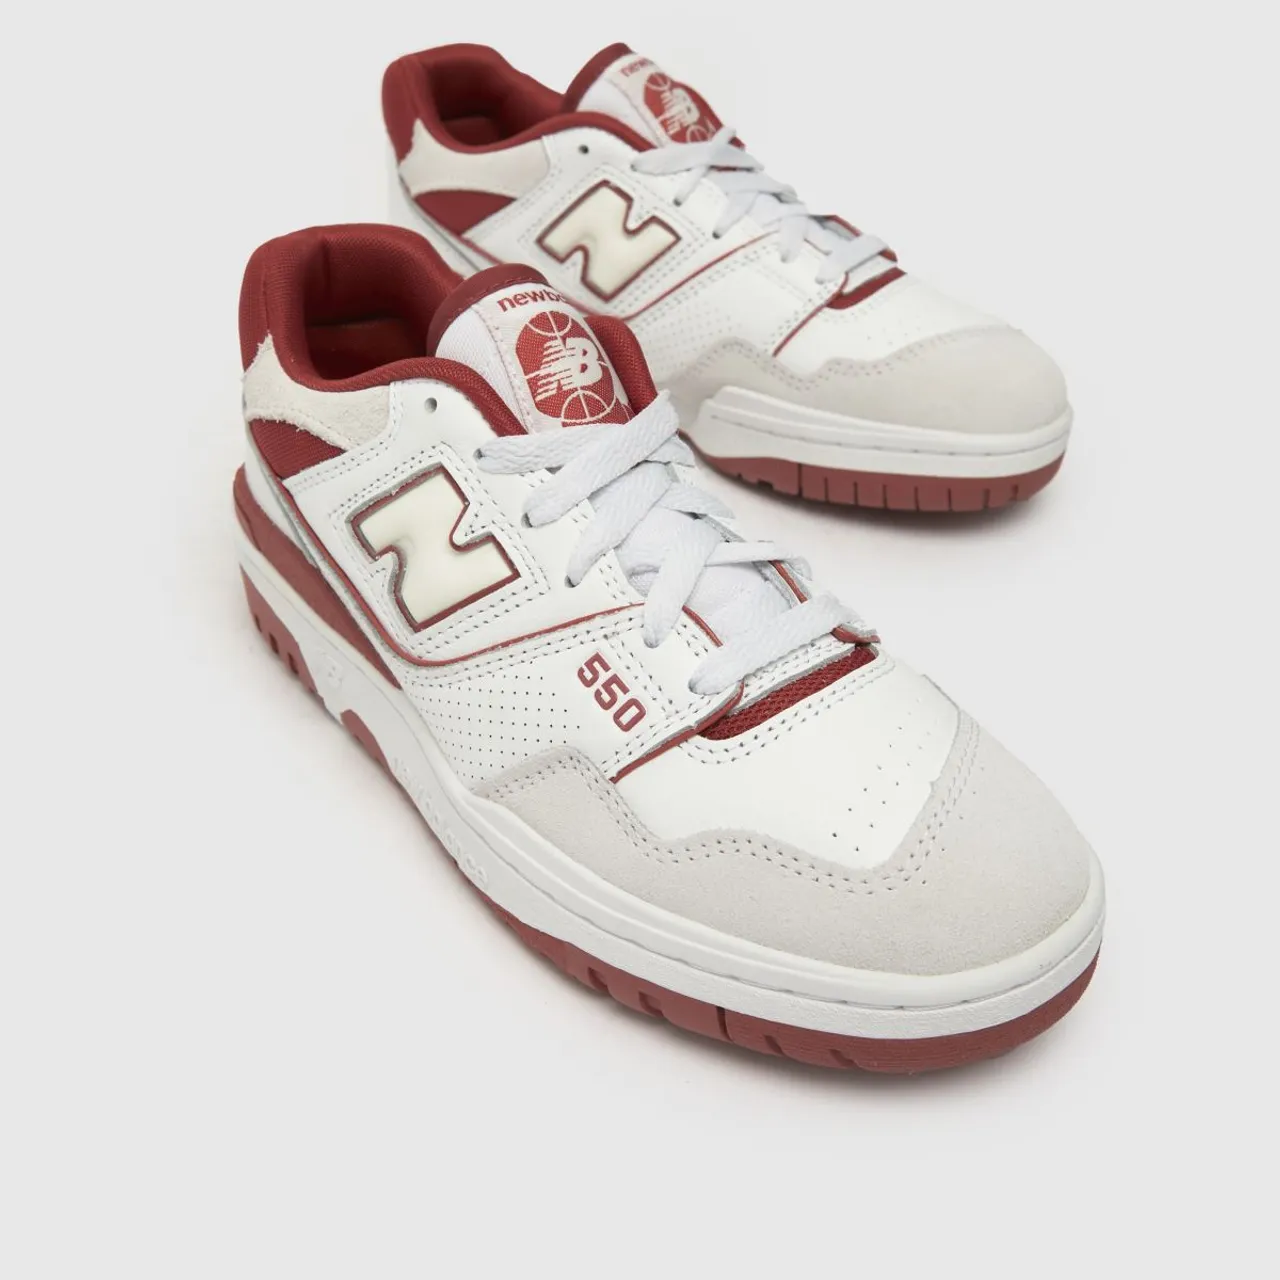 New Balance 550 Trainers In White & Red